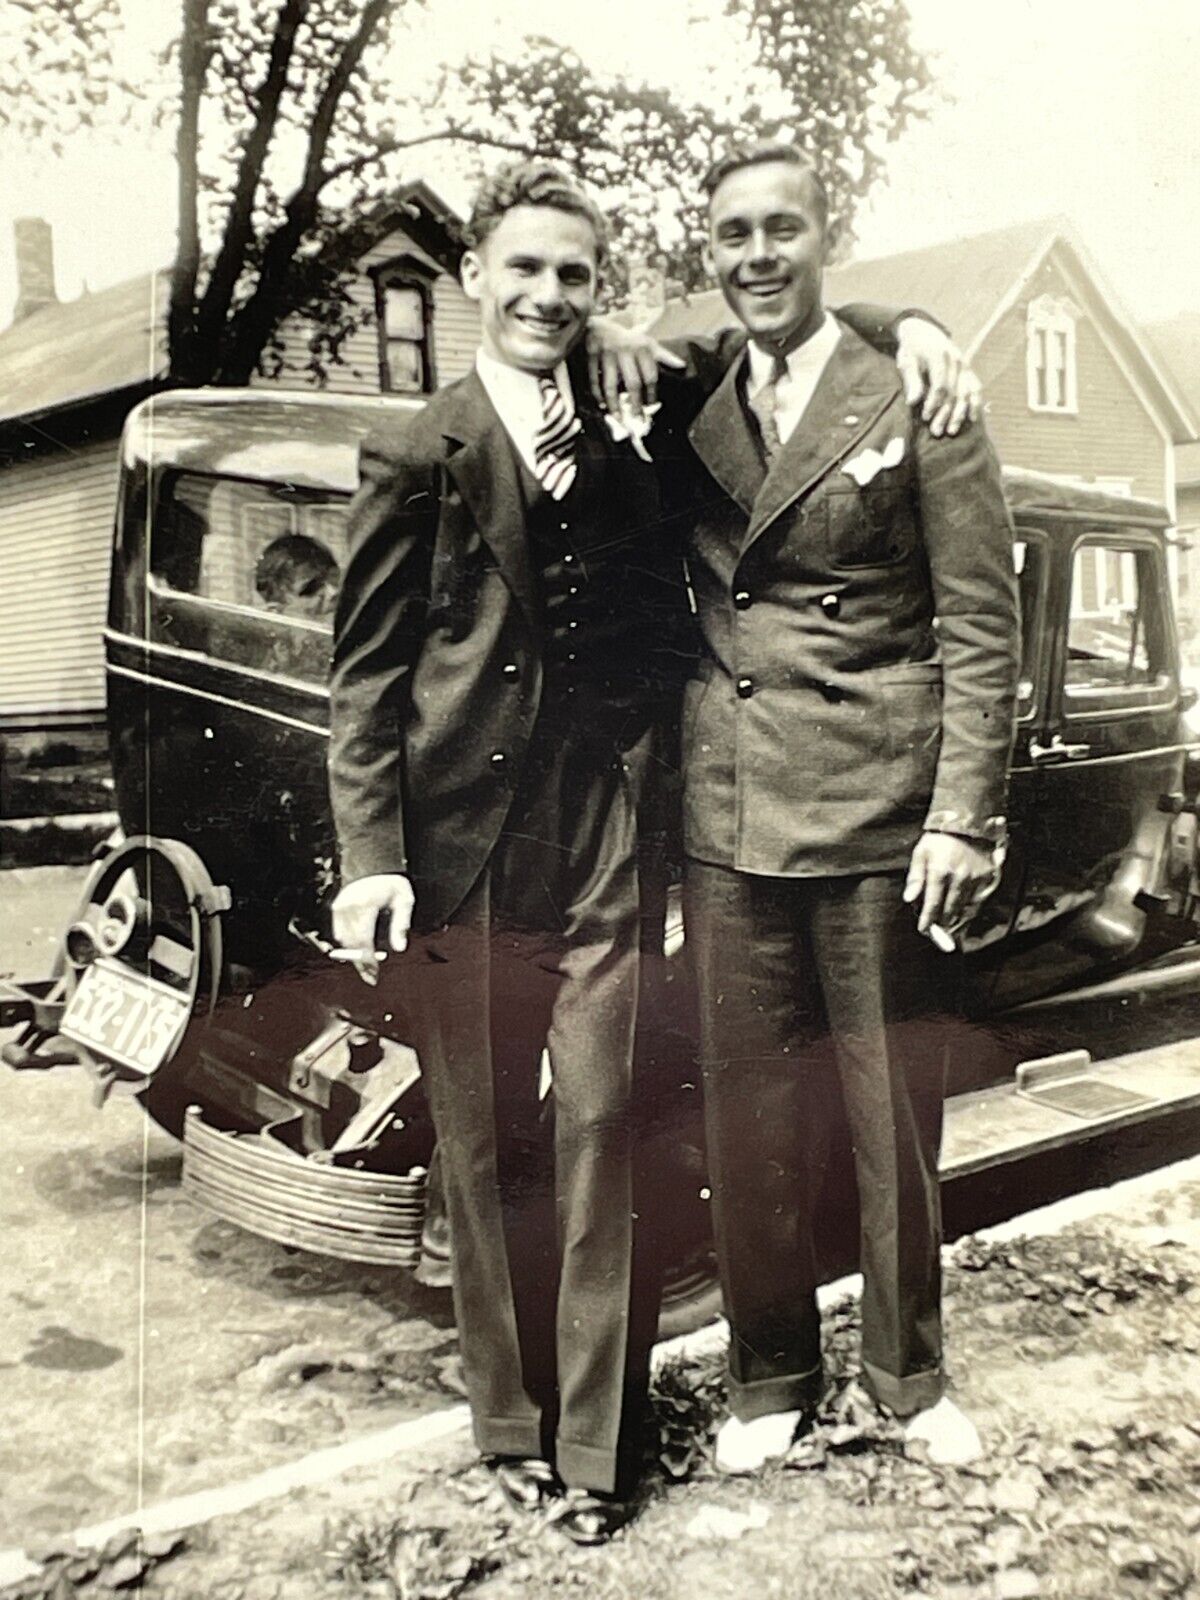 YH Photograph Two Men Embrace Suits Old Car 1935 Deco Border Around Photo 1930's